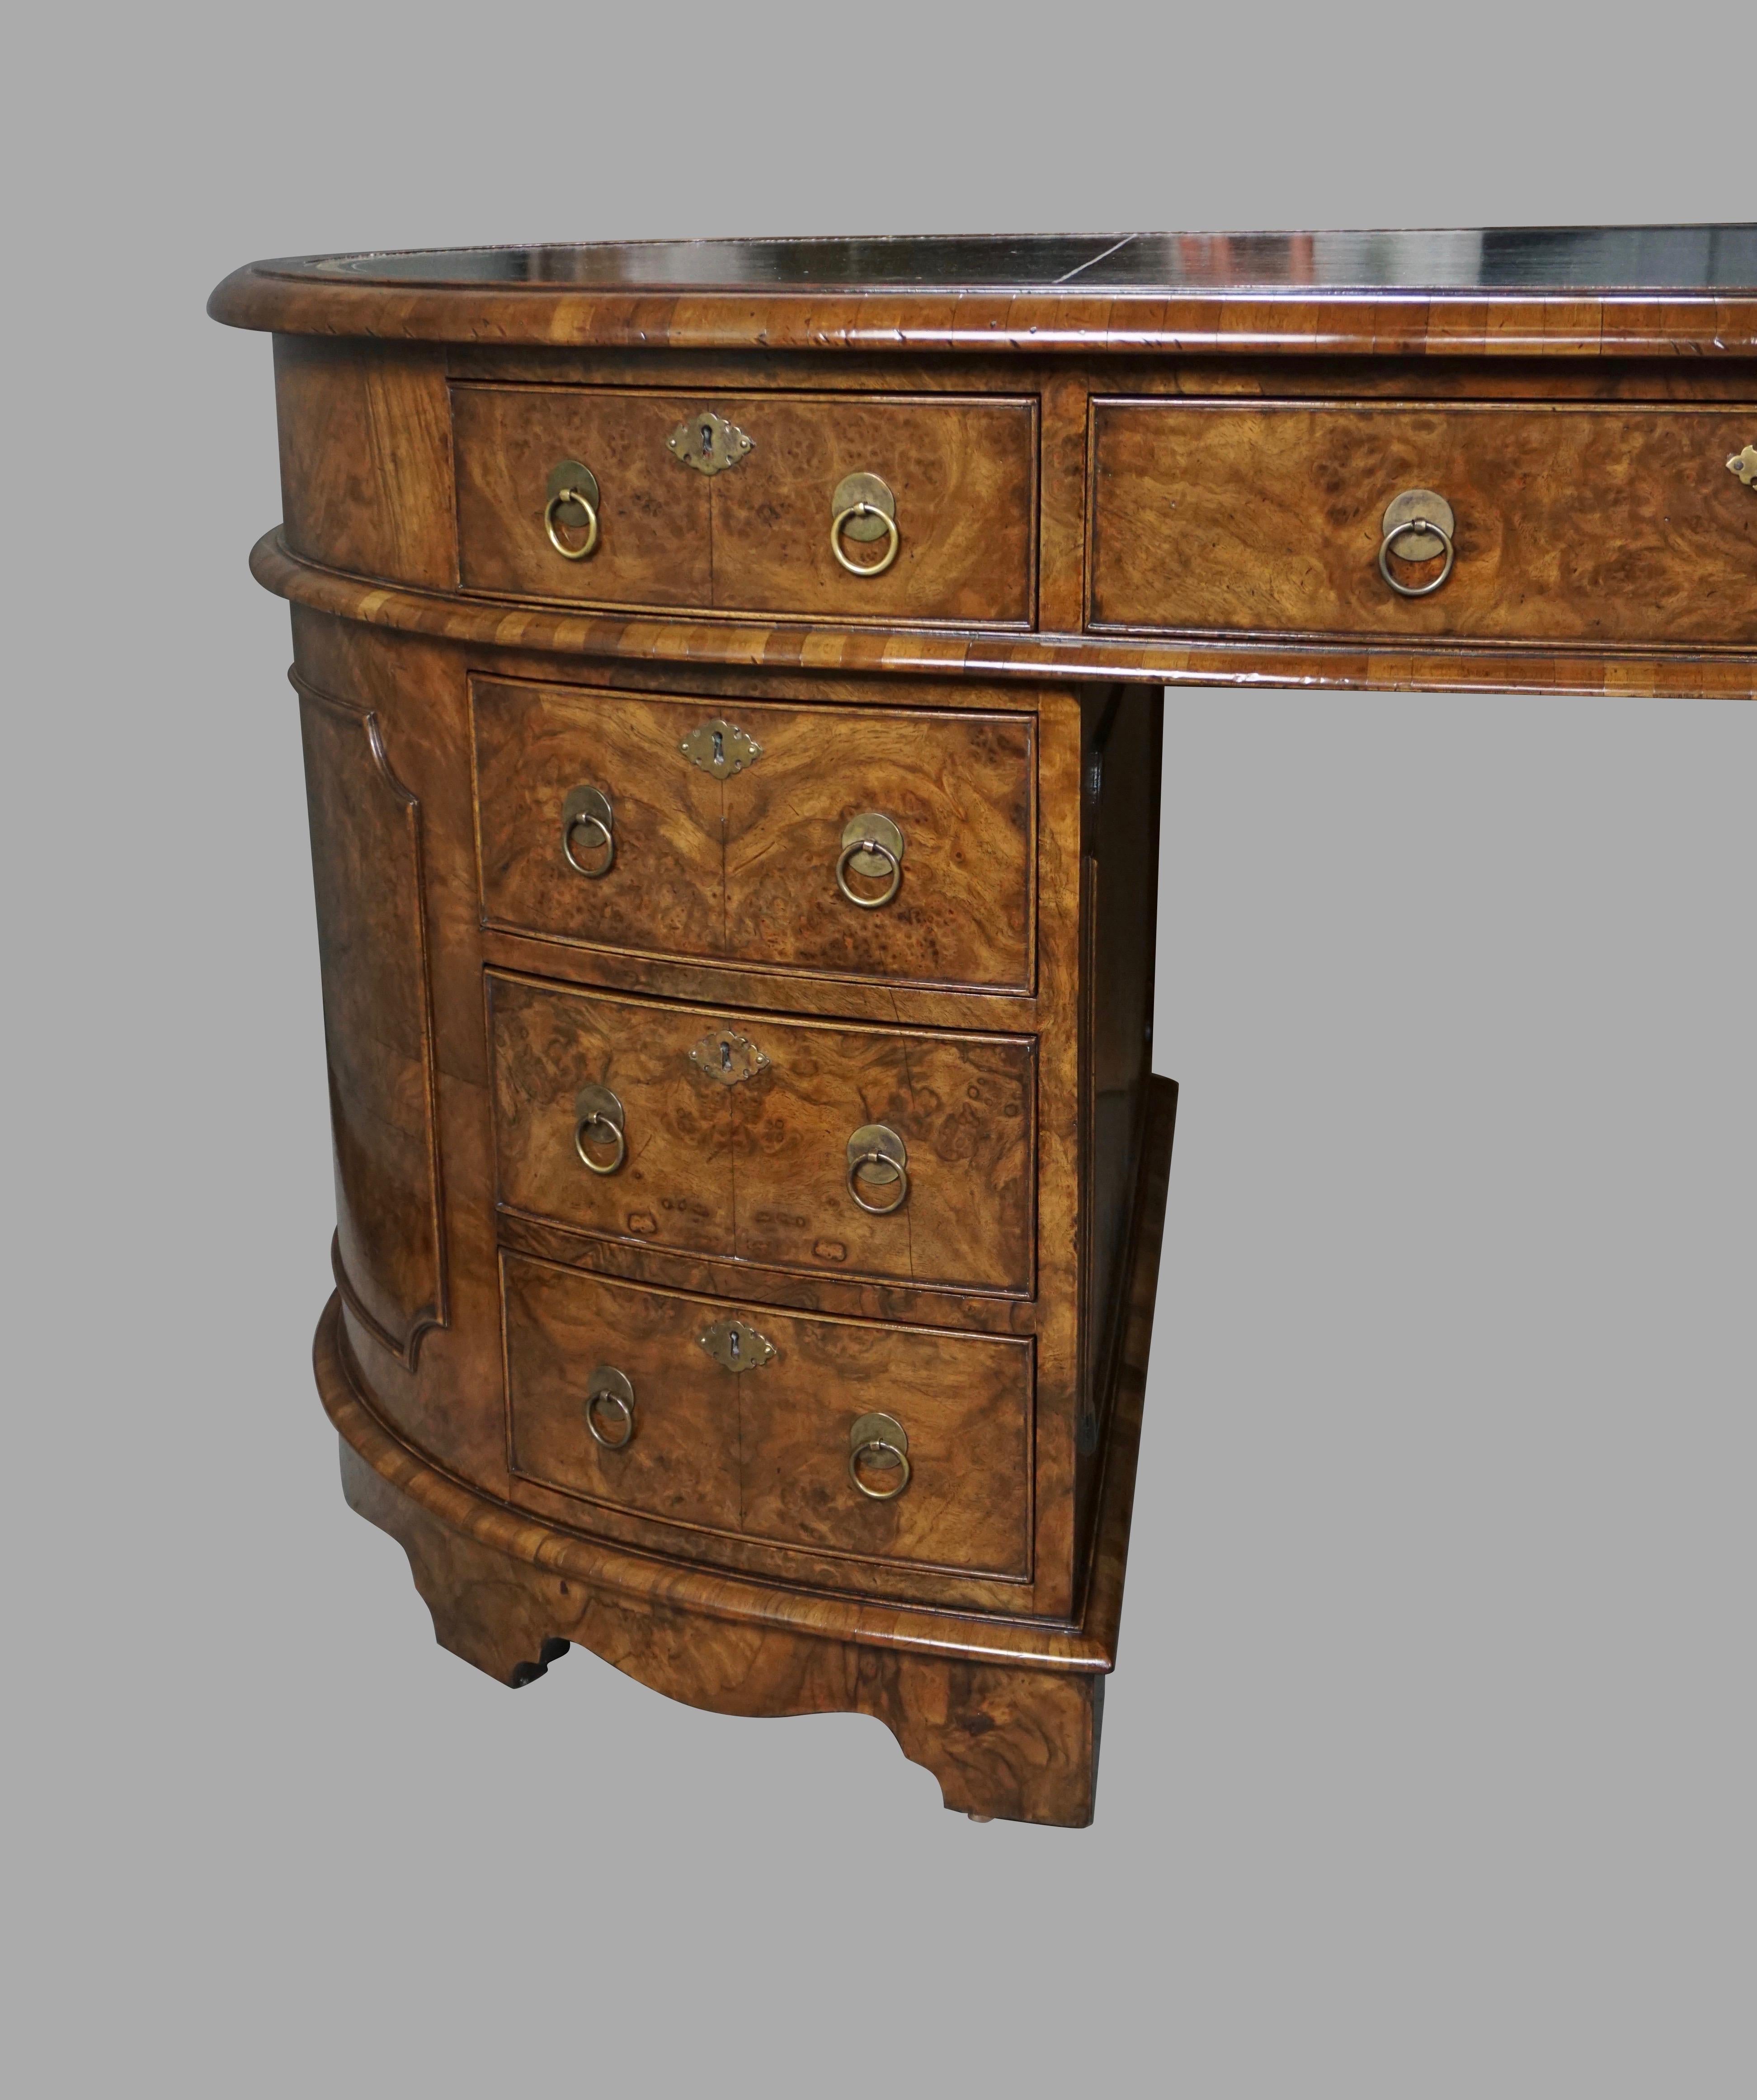 An elegant and unusual English burl walnut oval partners desk, the inset green tooled leather top with a molded edge above one long and 2 short drawers supported on pedestals with 3 further drawers on each side. Reverse is identically configured.